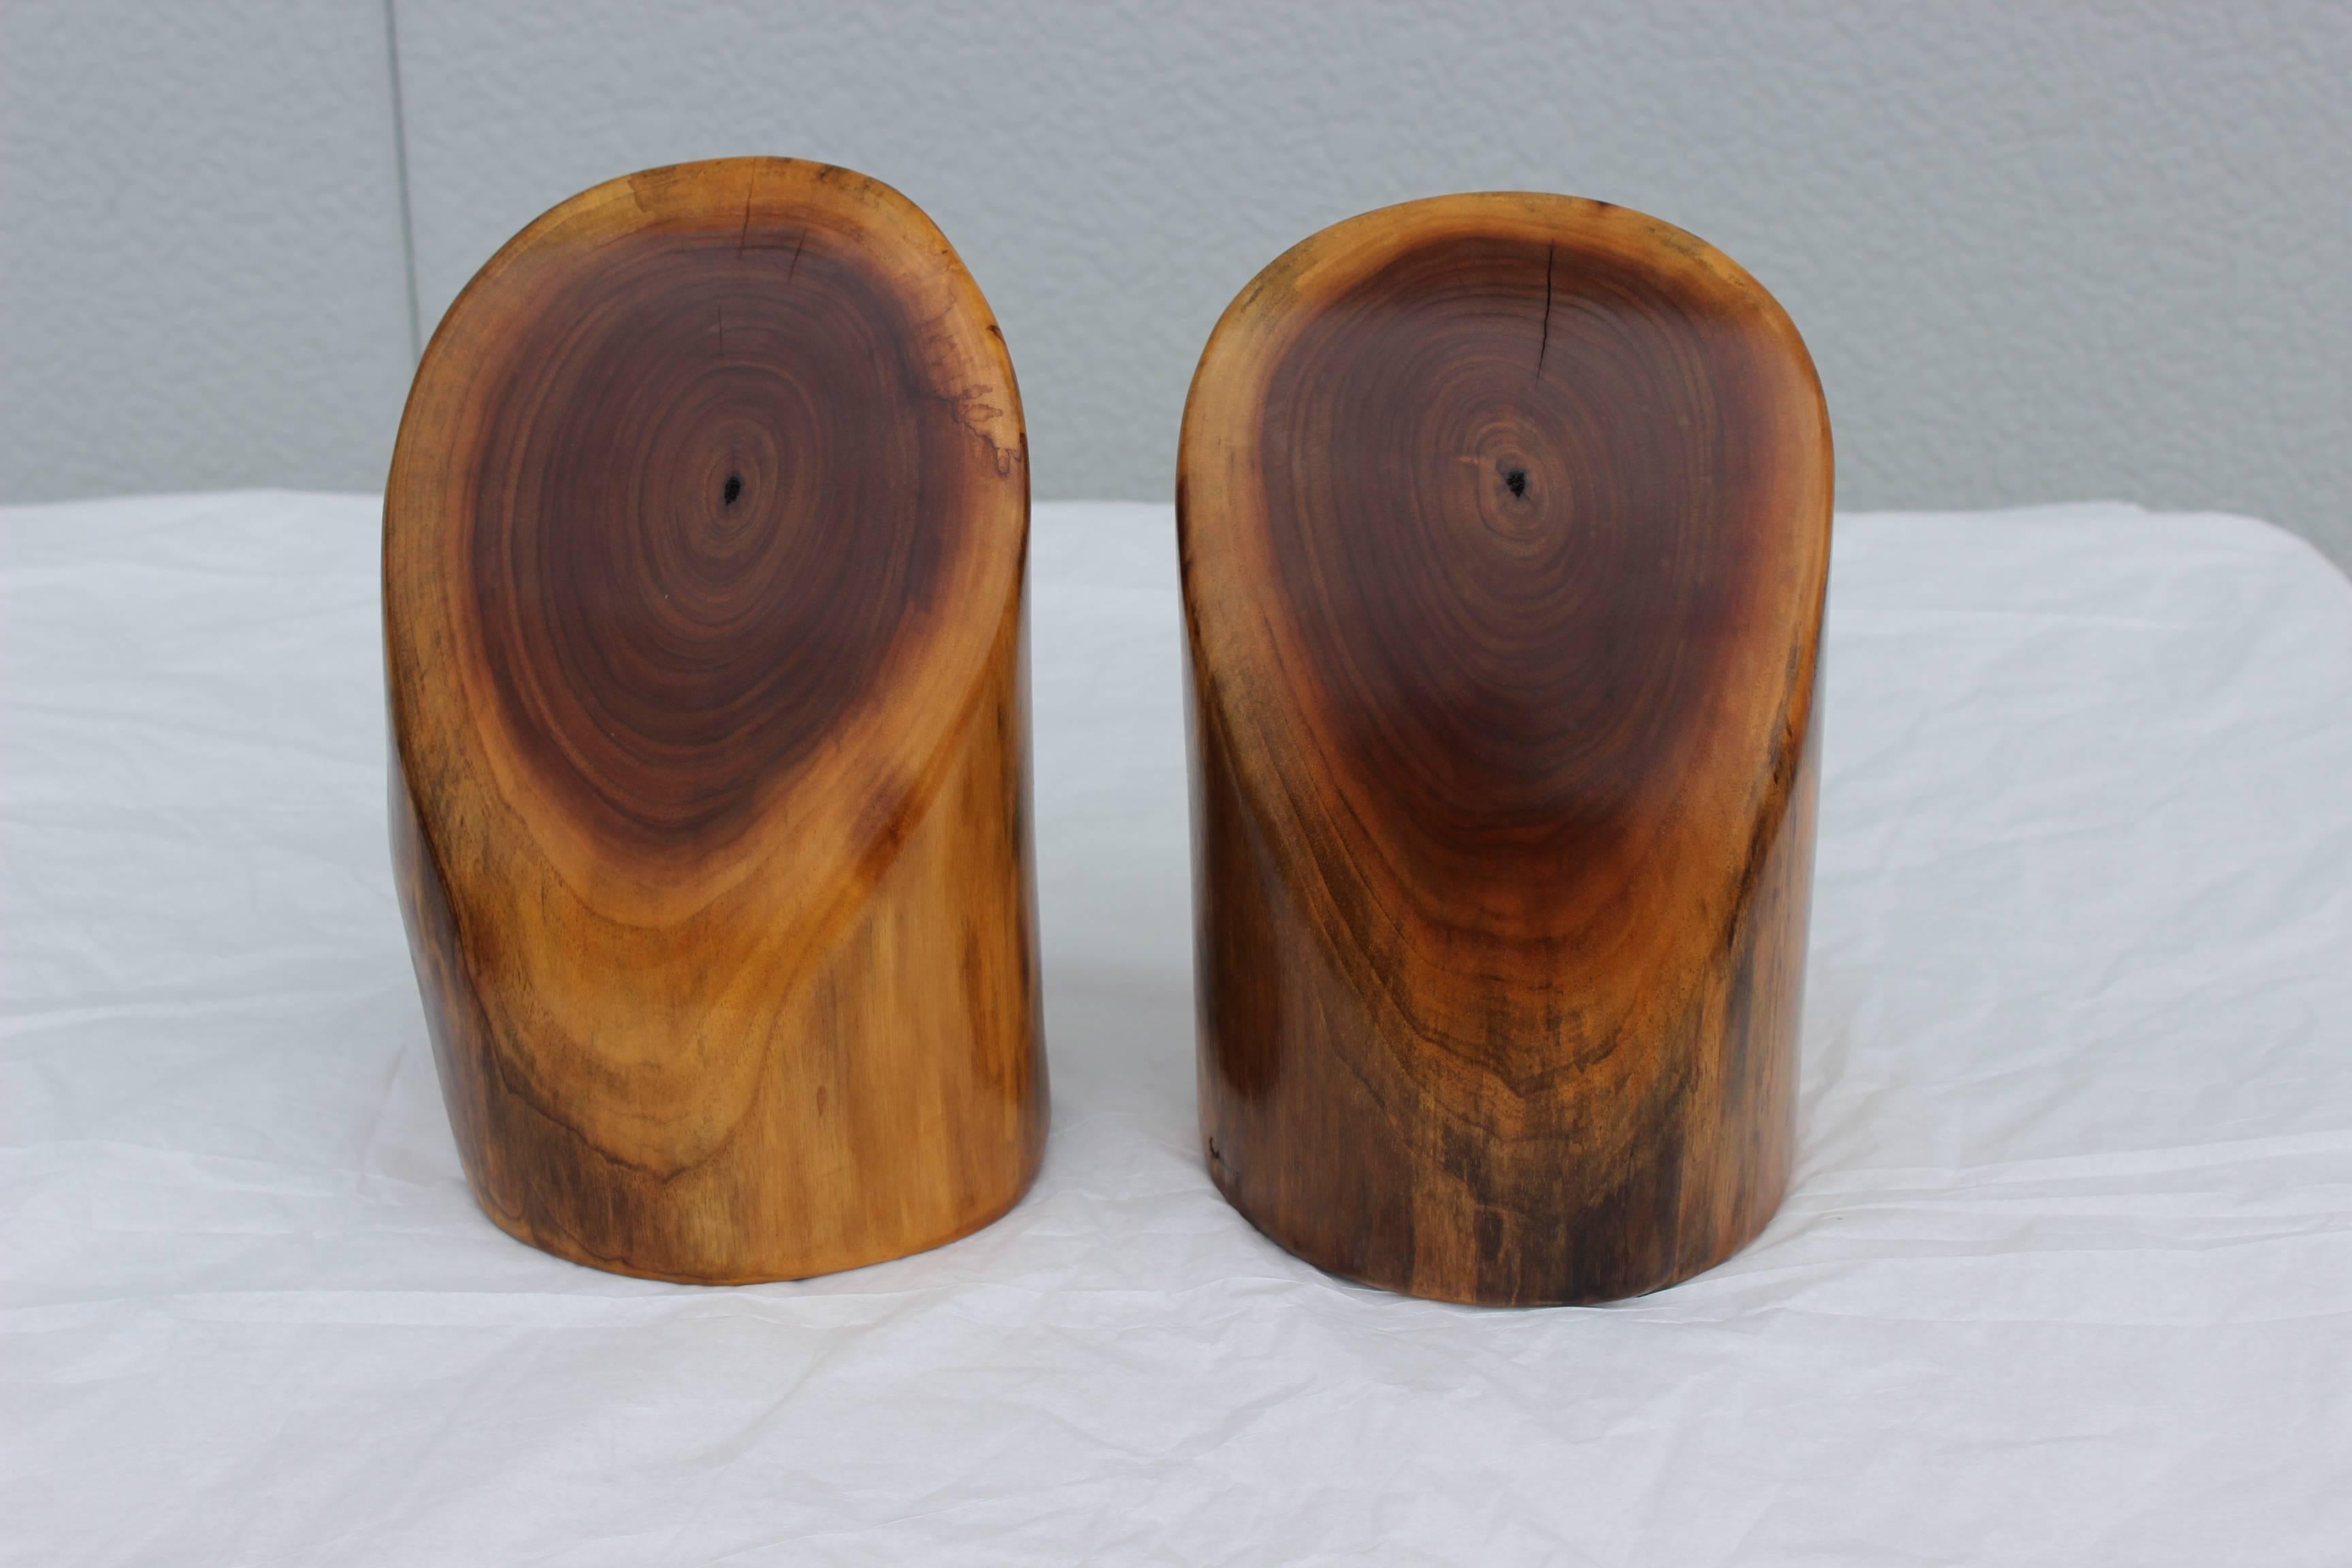 1980s Don Shoemaker style large wood bookends.